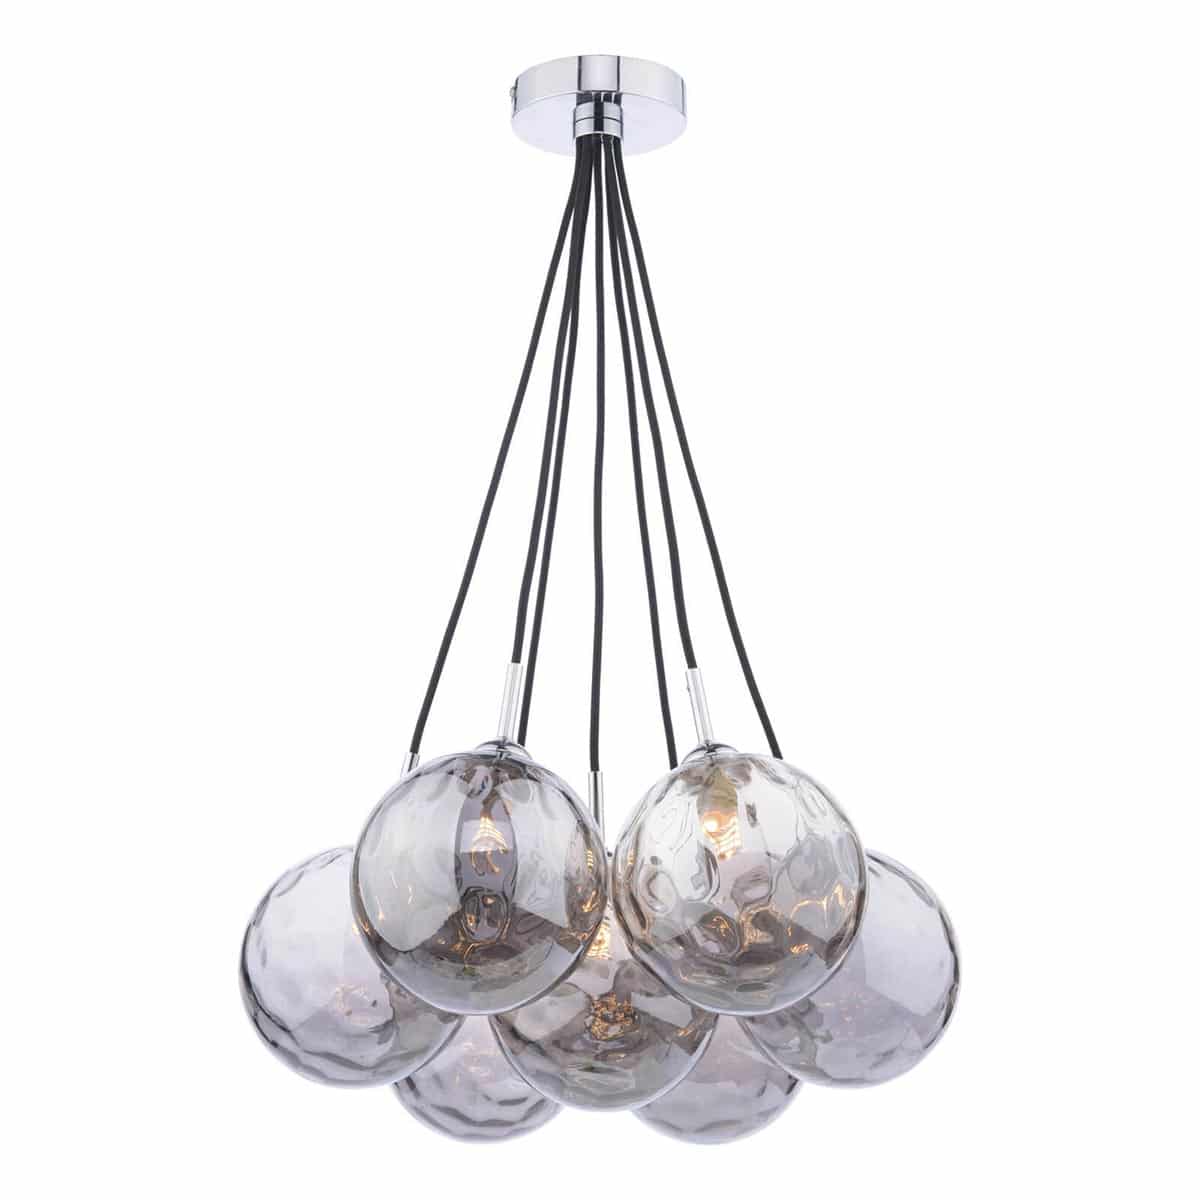 Dar Elpis 7 Light Cluster Pendant Smoked Glass Dimple Globes